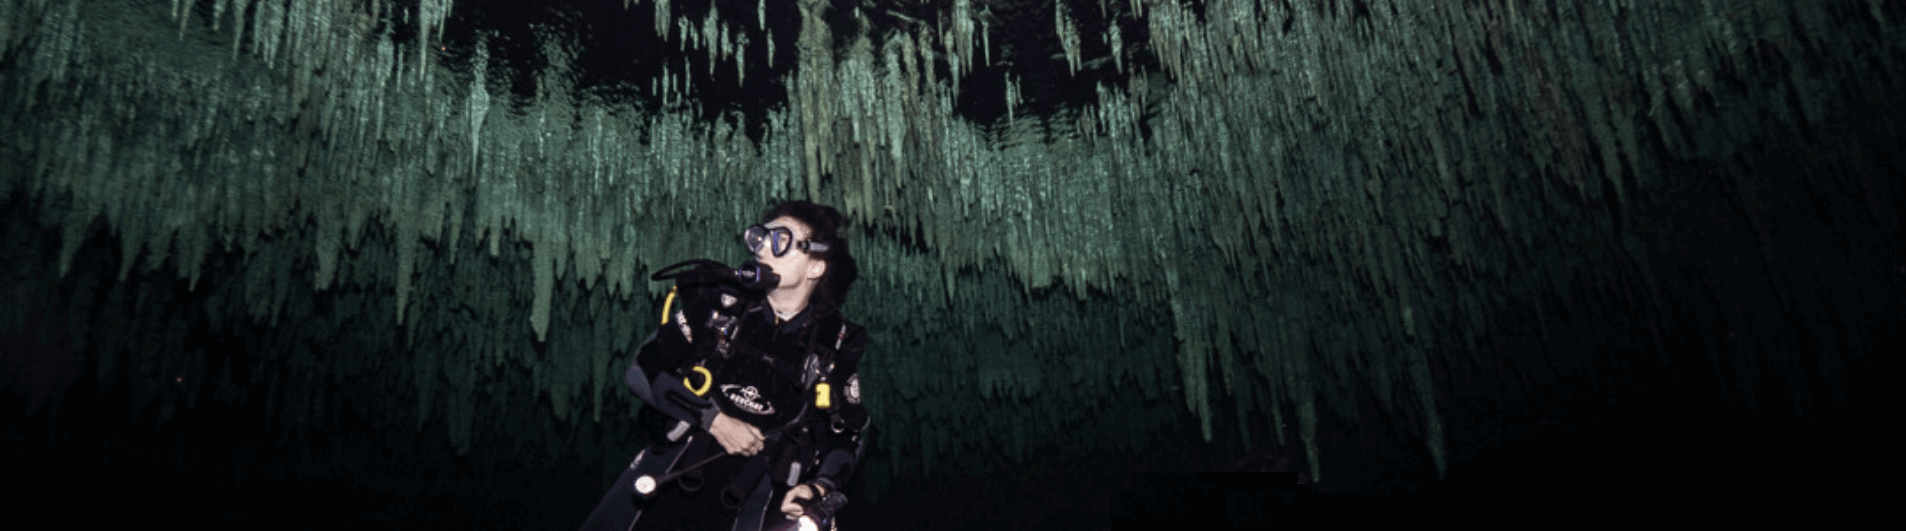 Rules for Scuba Diving in Cenotes